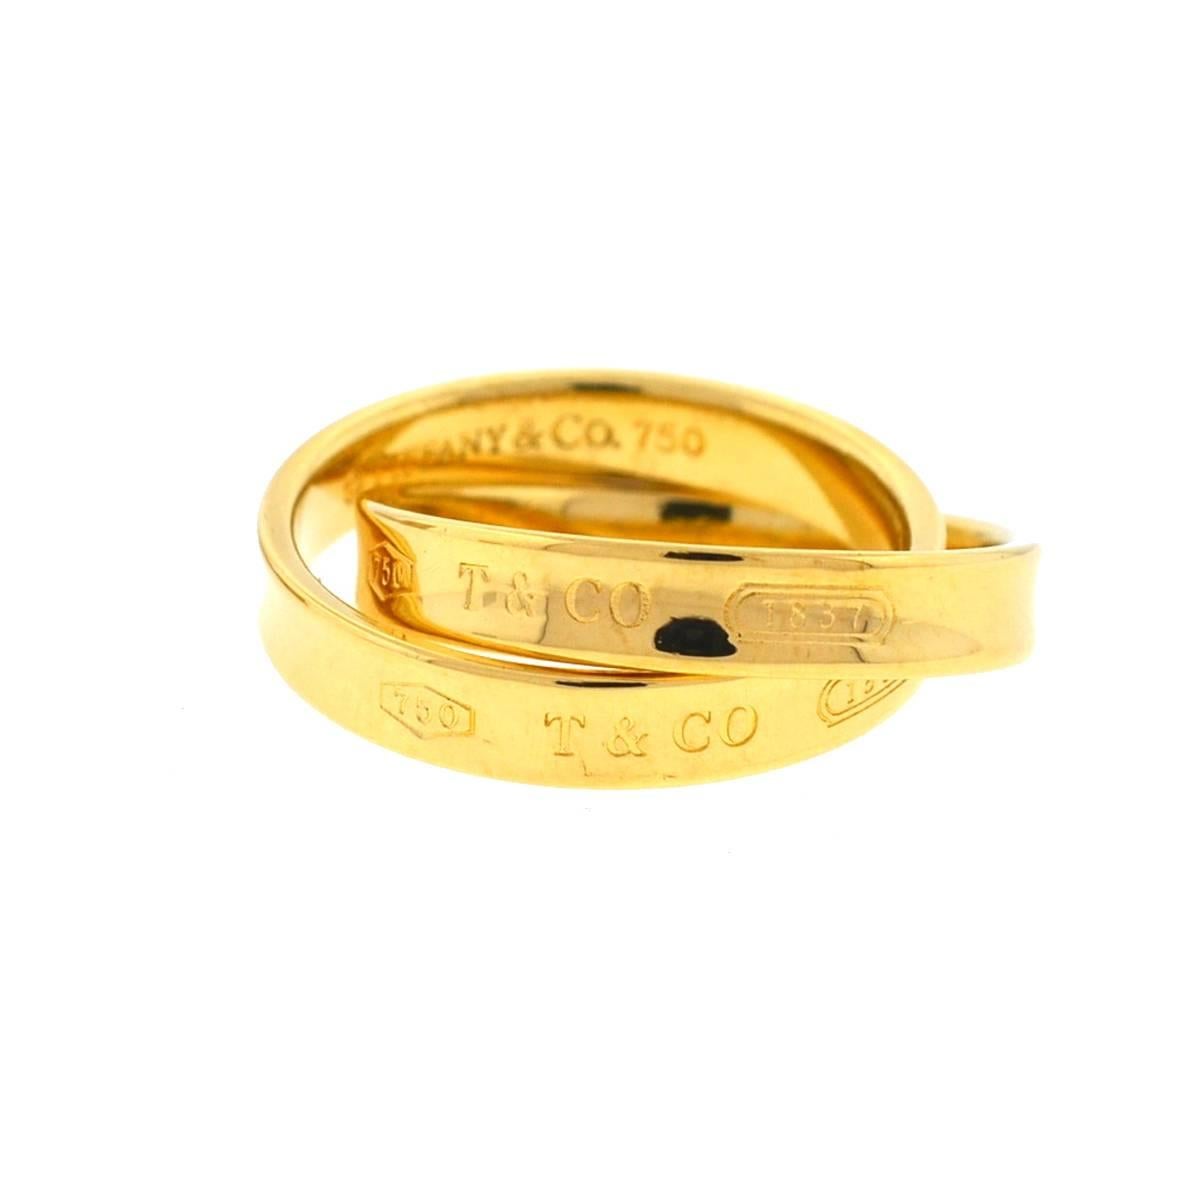 Company - Tiffany & Co.
Style - Interlocking Circles Ring
Metal - 18k Yellow Gold 
Size - 5.5
Weight - 7.8 grams
Includes - Ring Only
8693-10uee